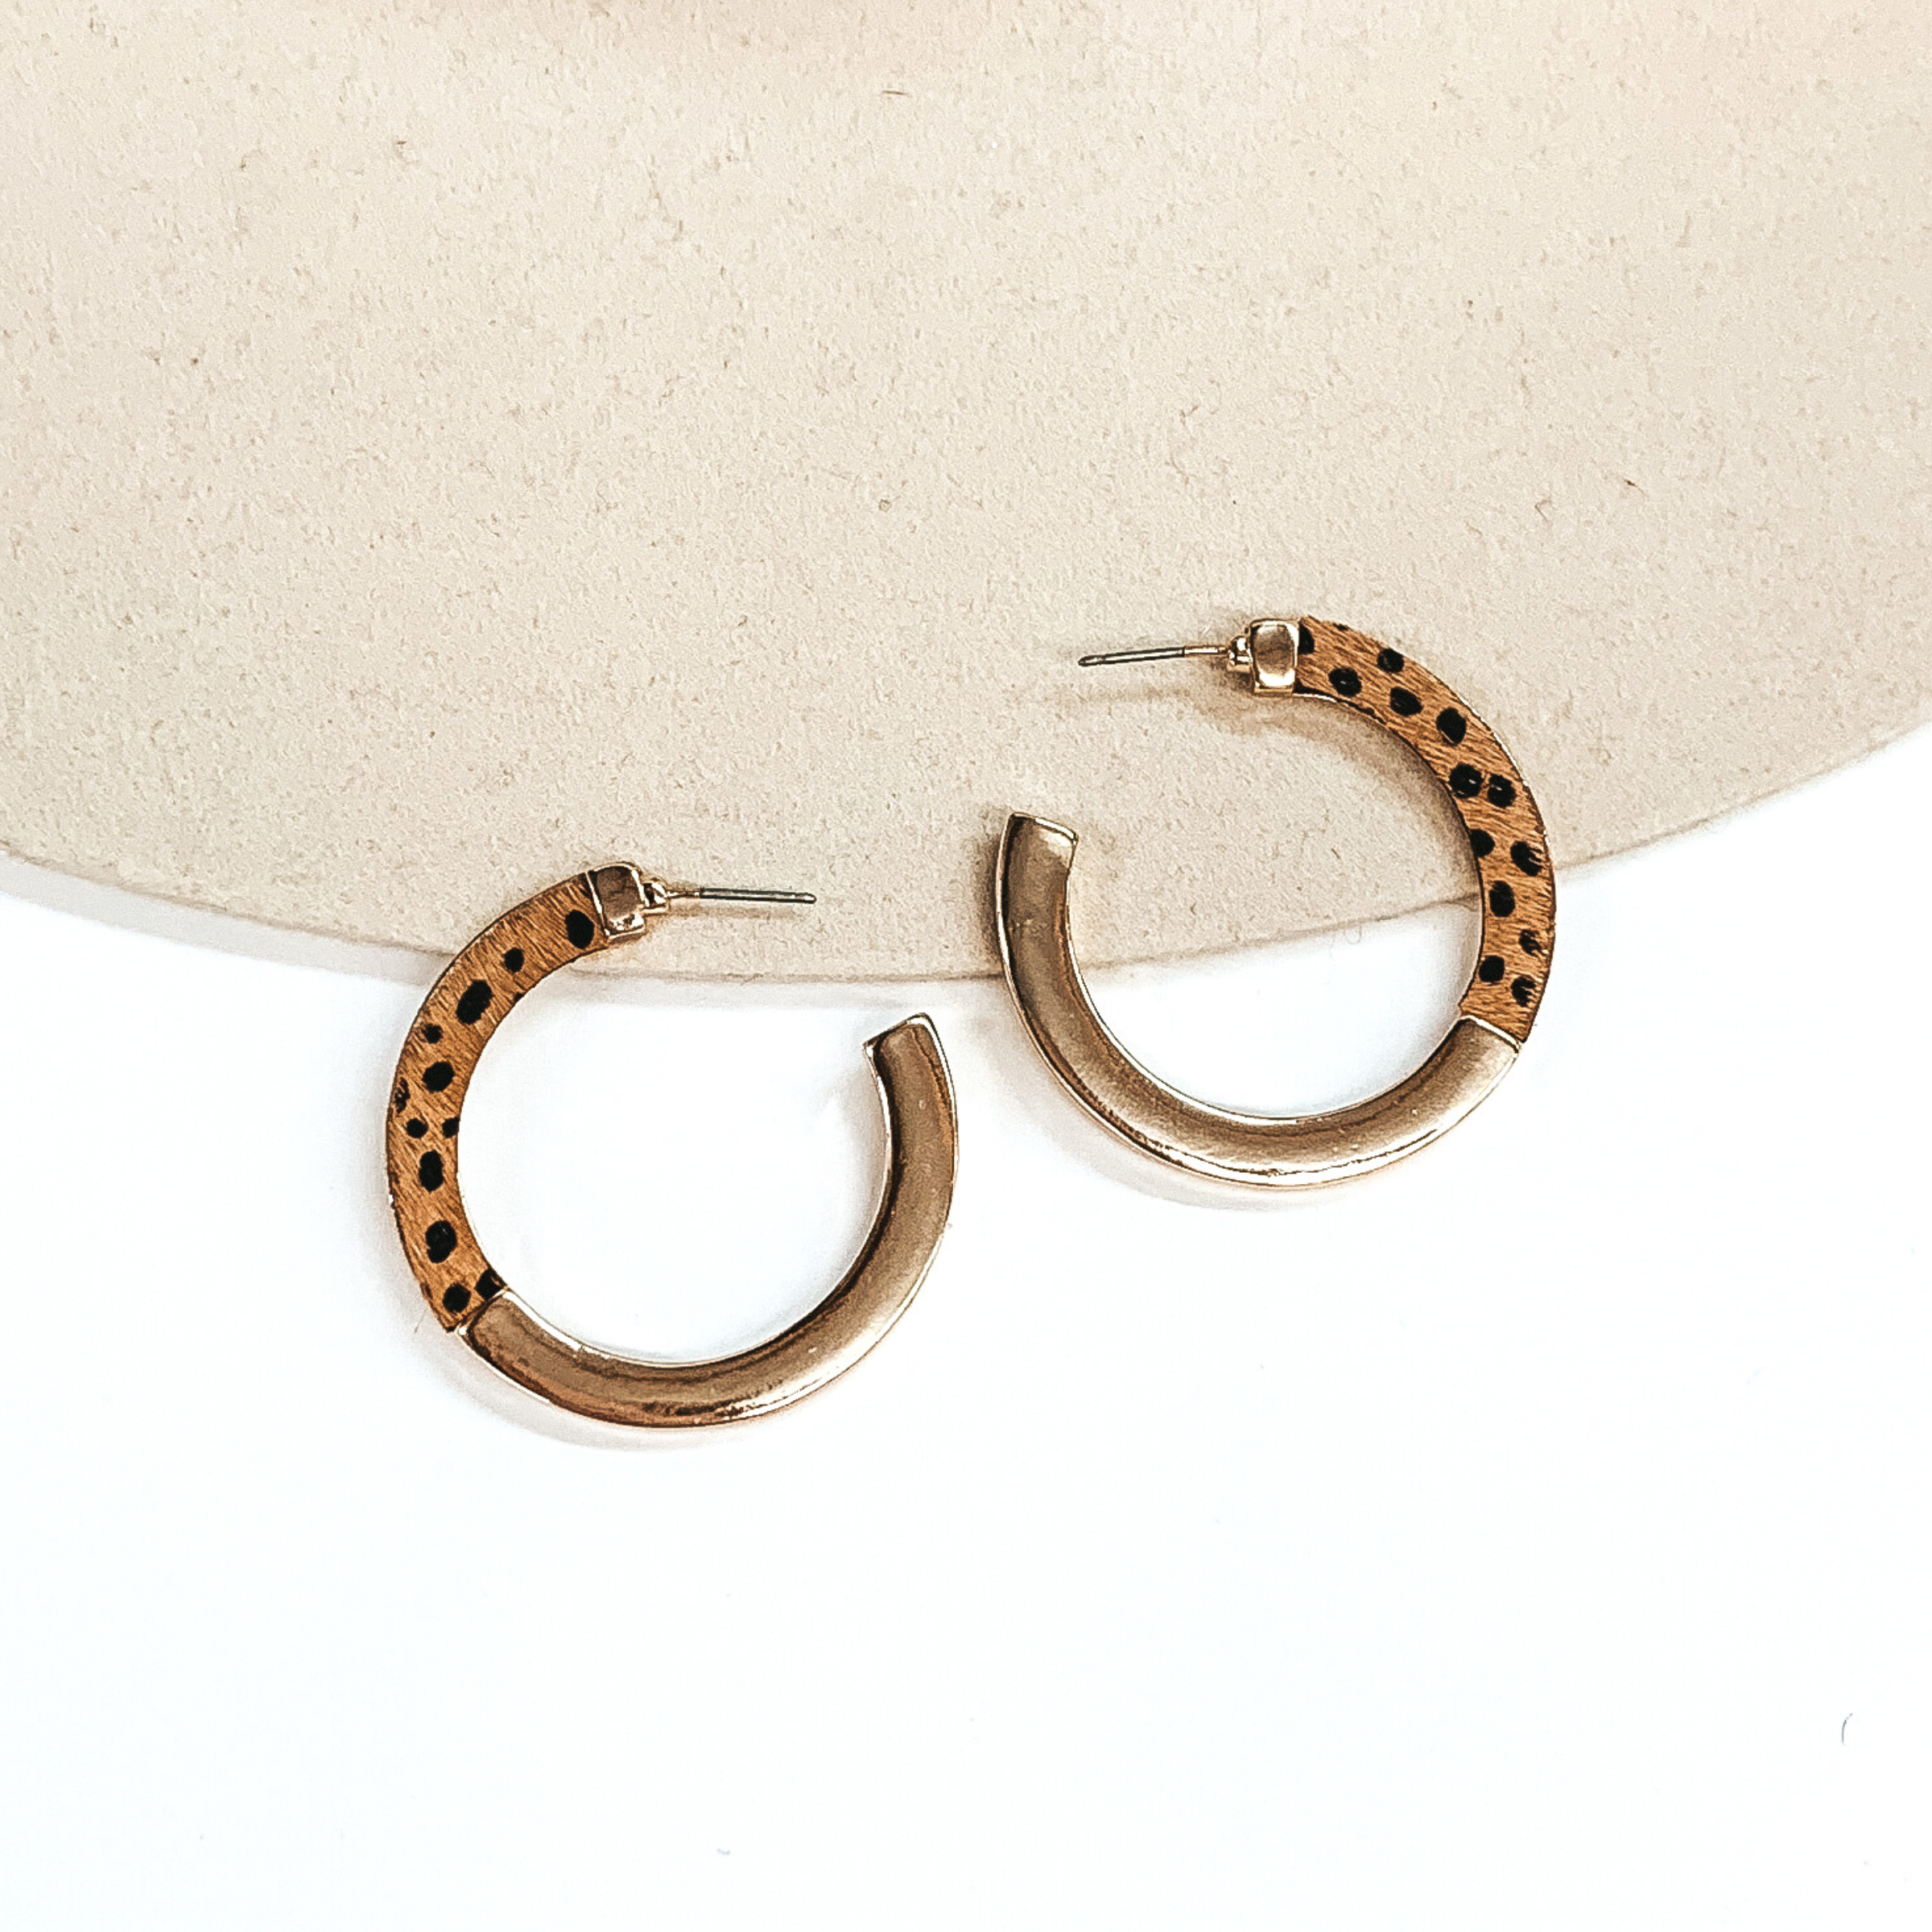 Flat hoops that are half gold and half tan with a black cheetah print. These earrings are pictured on a white and beige background.